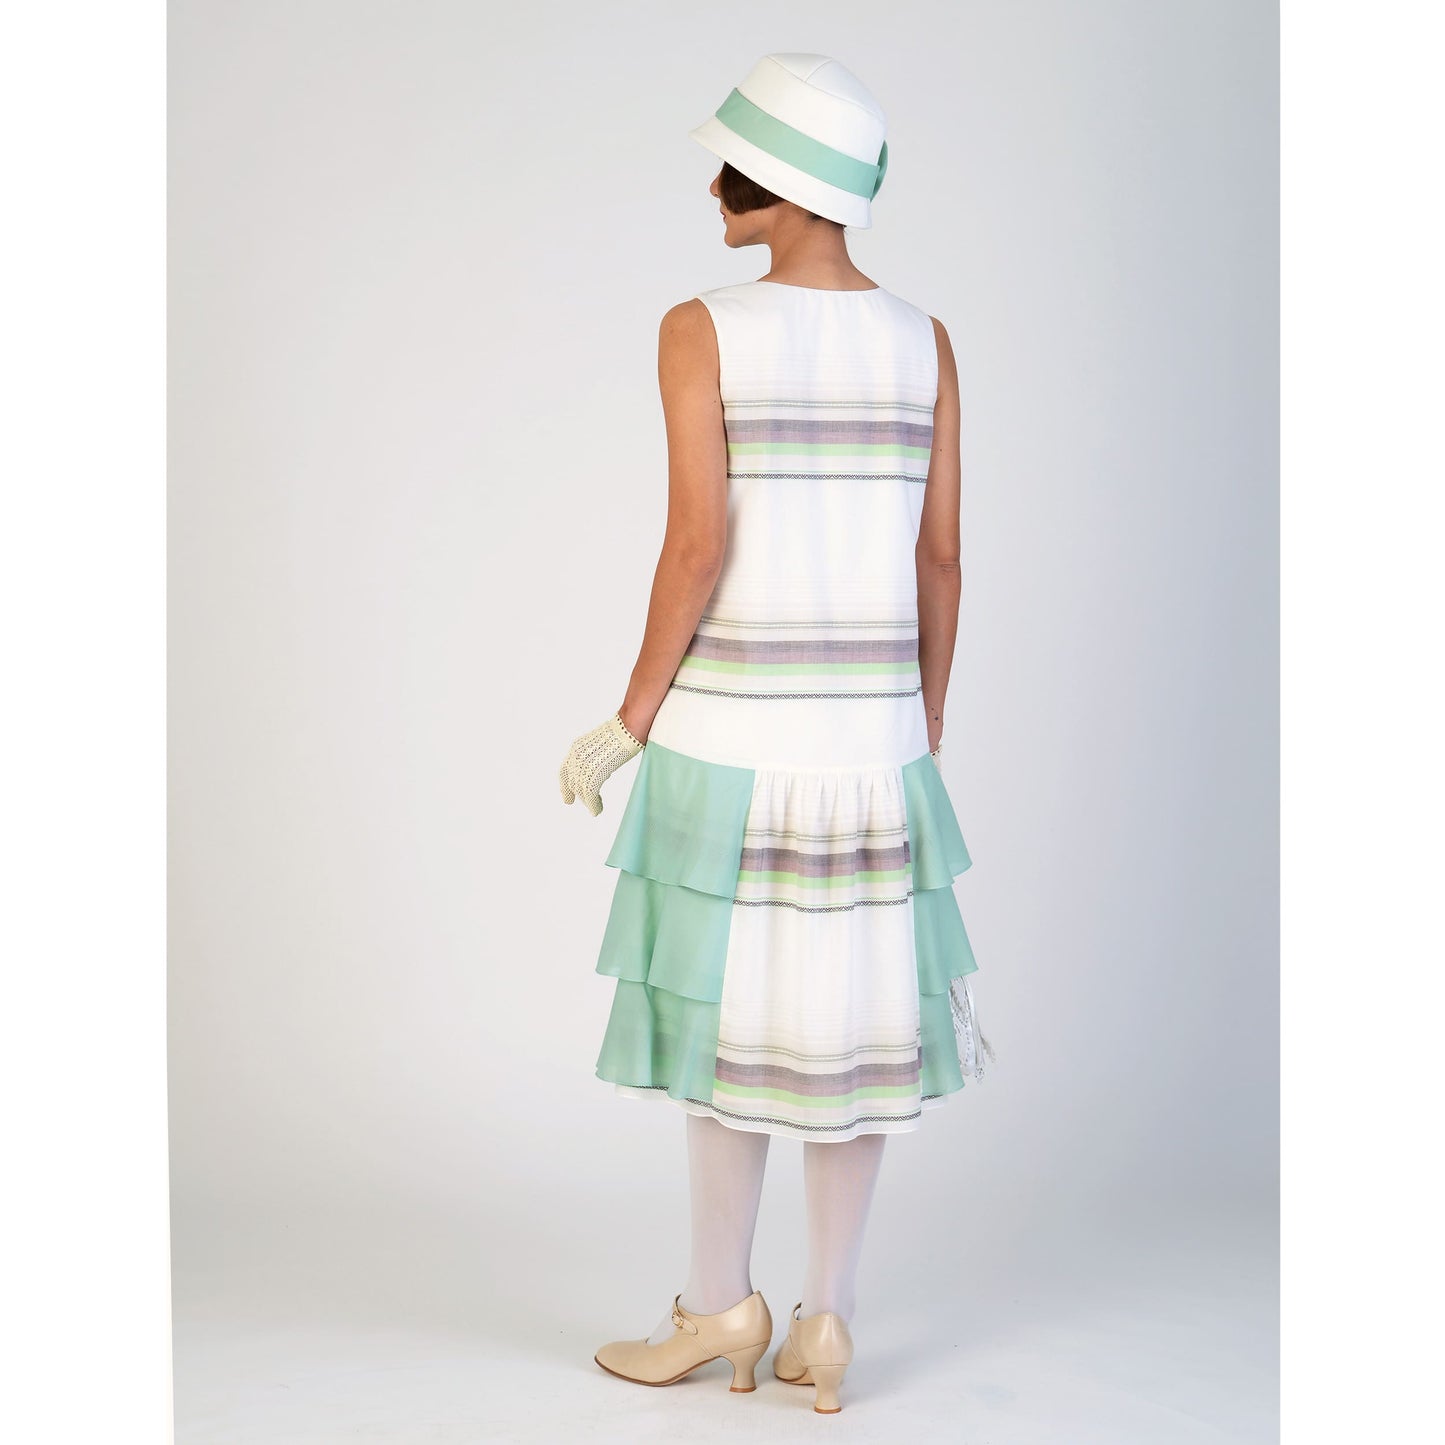 1920s cotton garden party dress in light cream and mint green